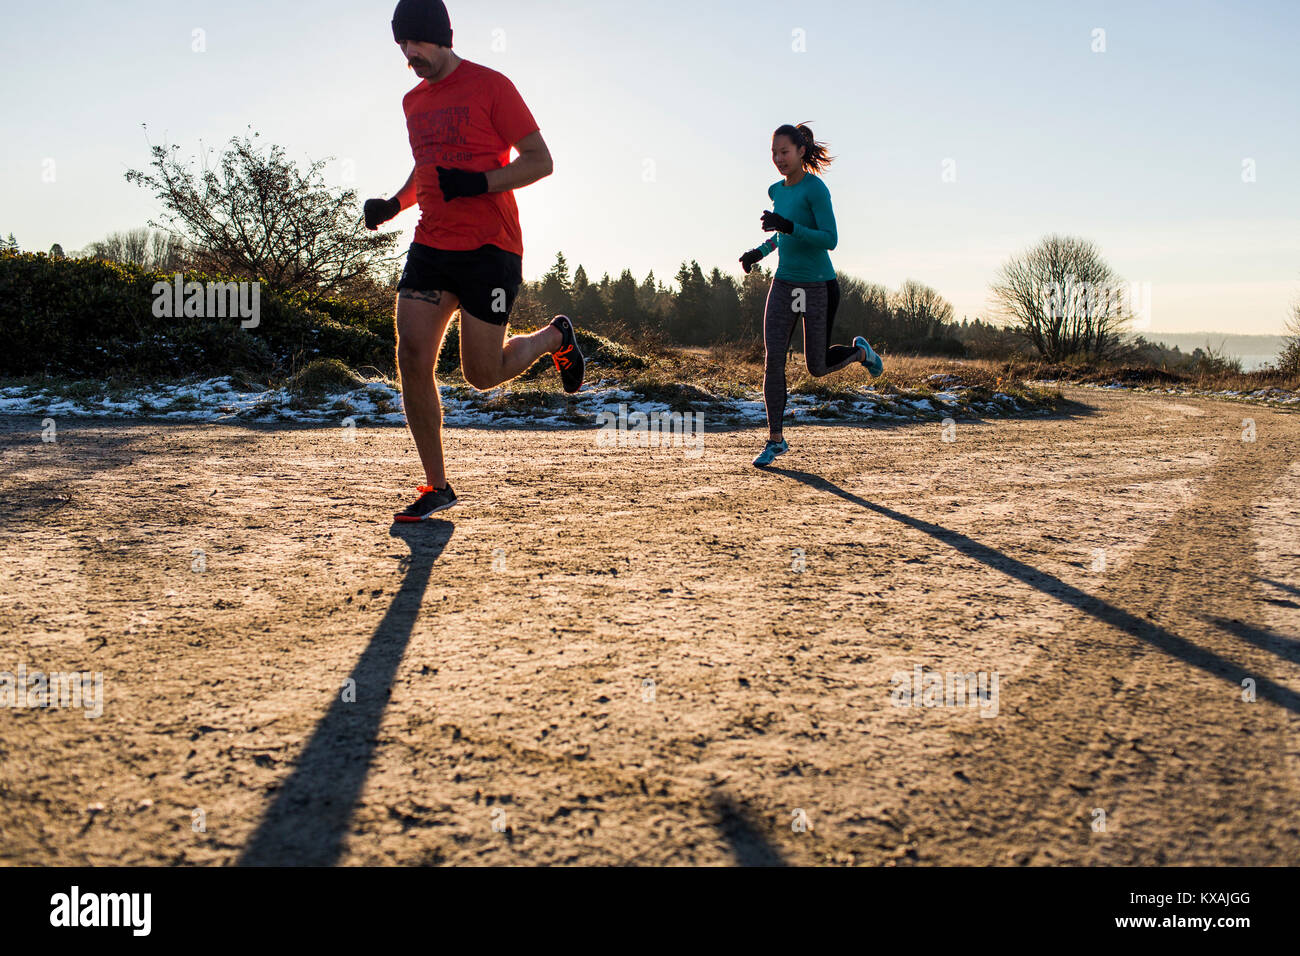 Man and woman jogging on dirt road in winter, Discovery Park, Seattle, Washington State, USA Stock Photo